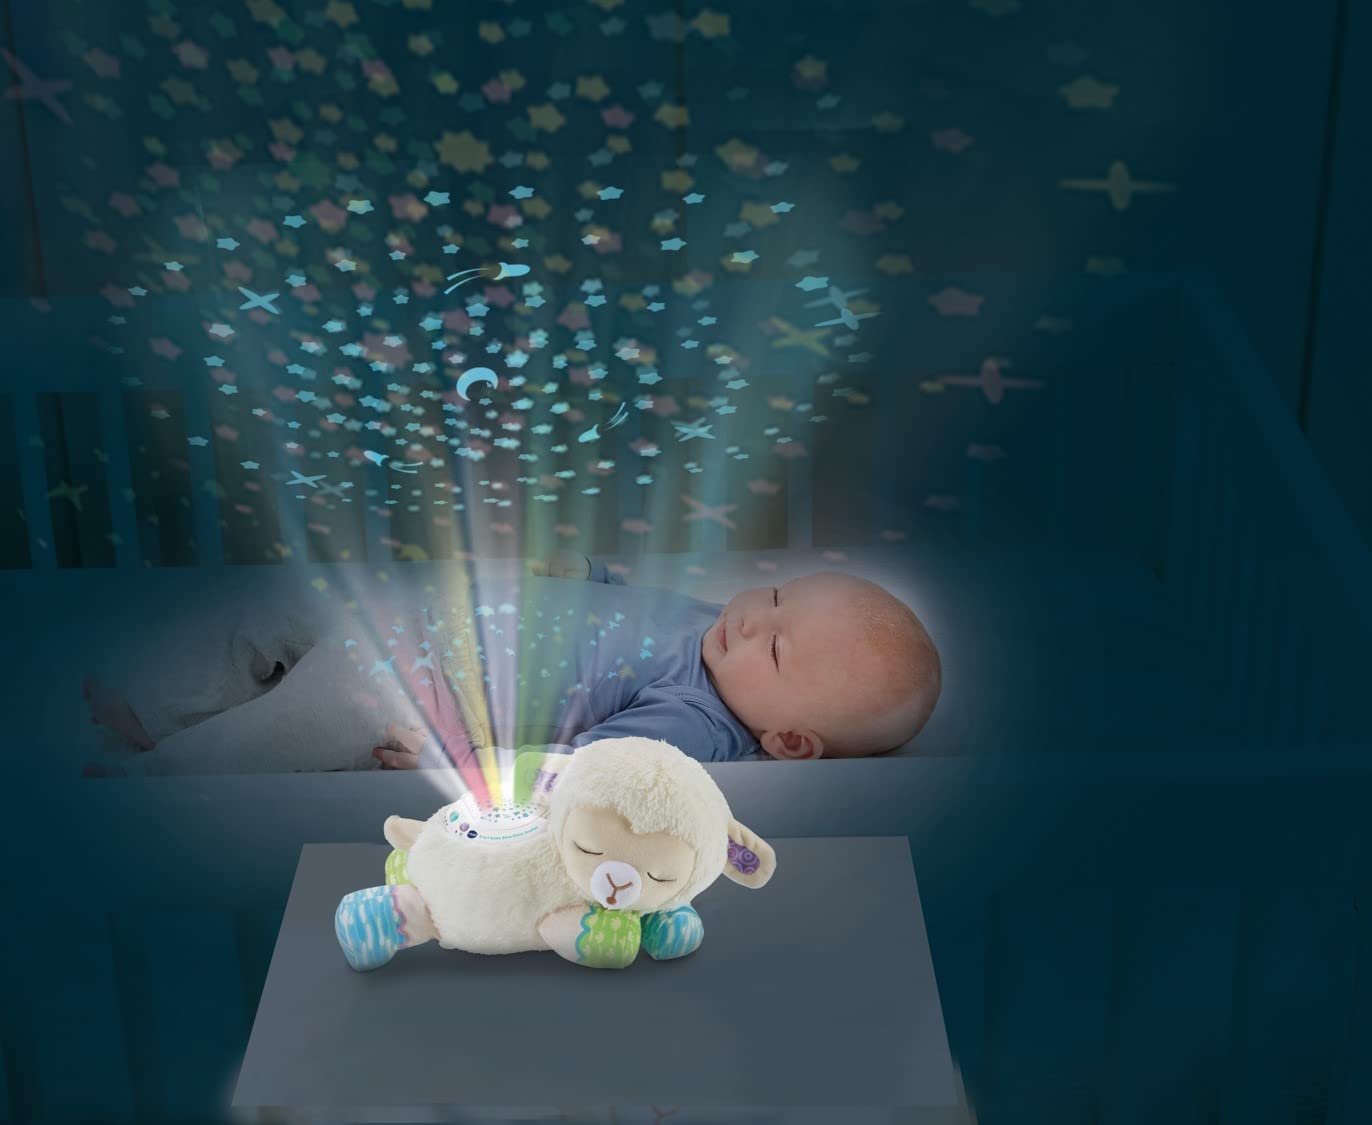 VTech 3-In-1 Starry Skies Sheep Soother